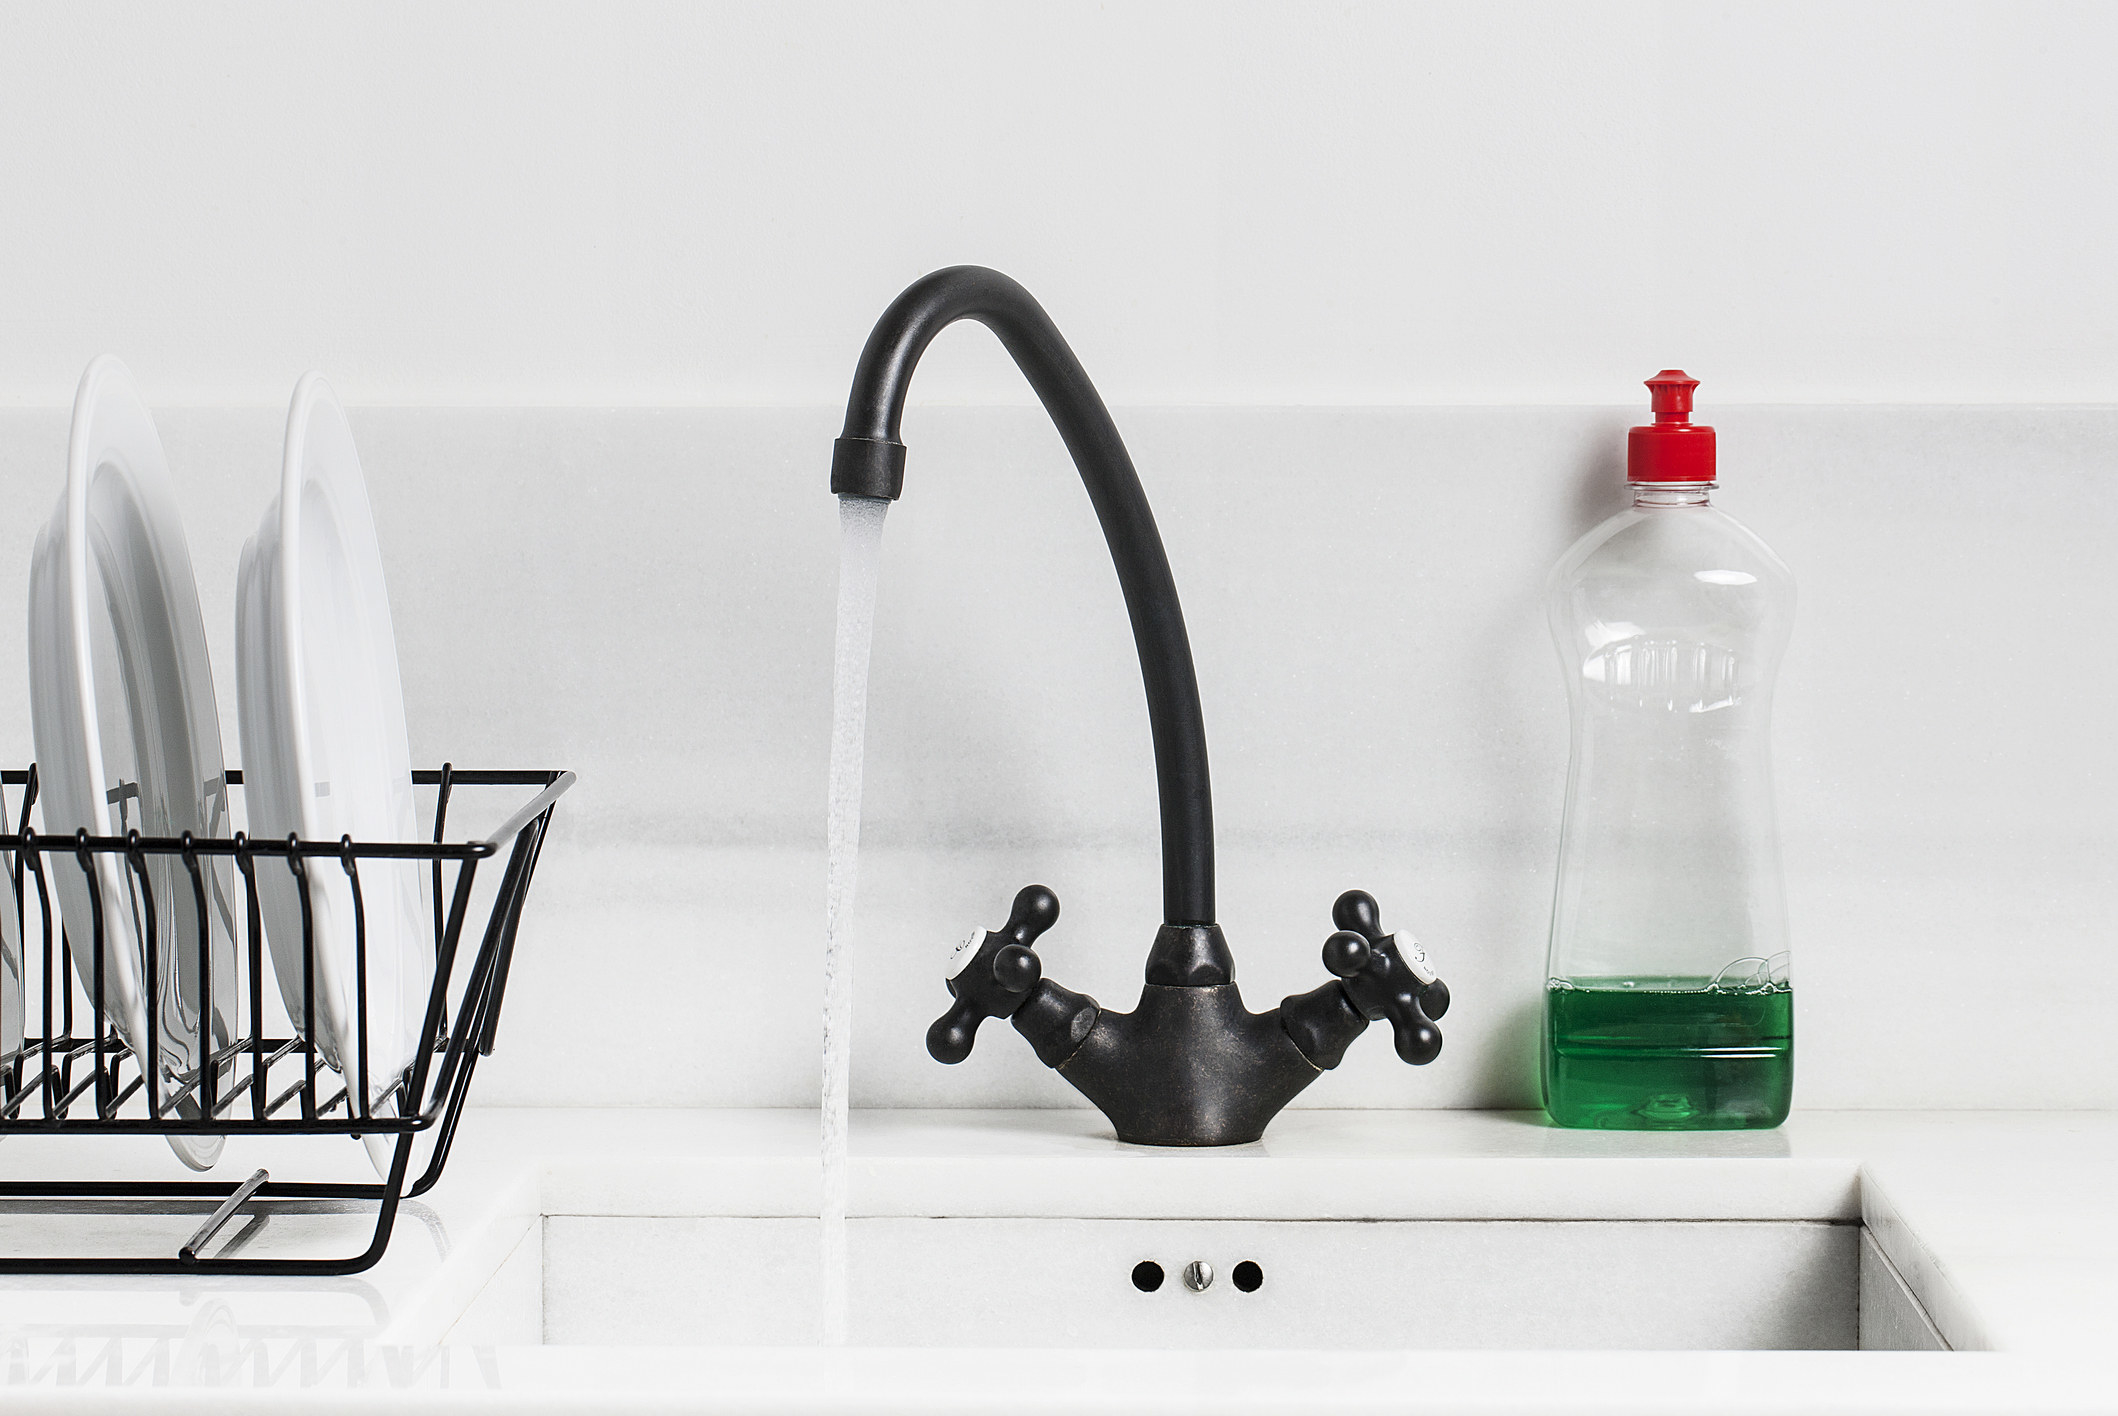 A sink with running water, dishwashing detergent, and clean dishes on a rack.